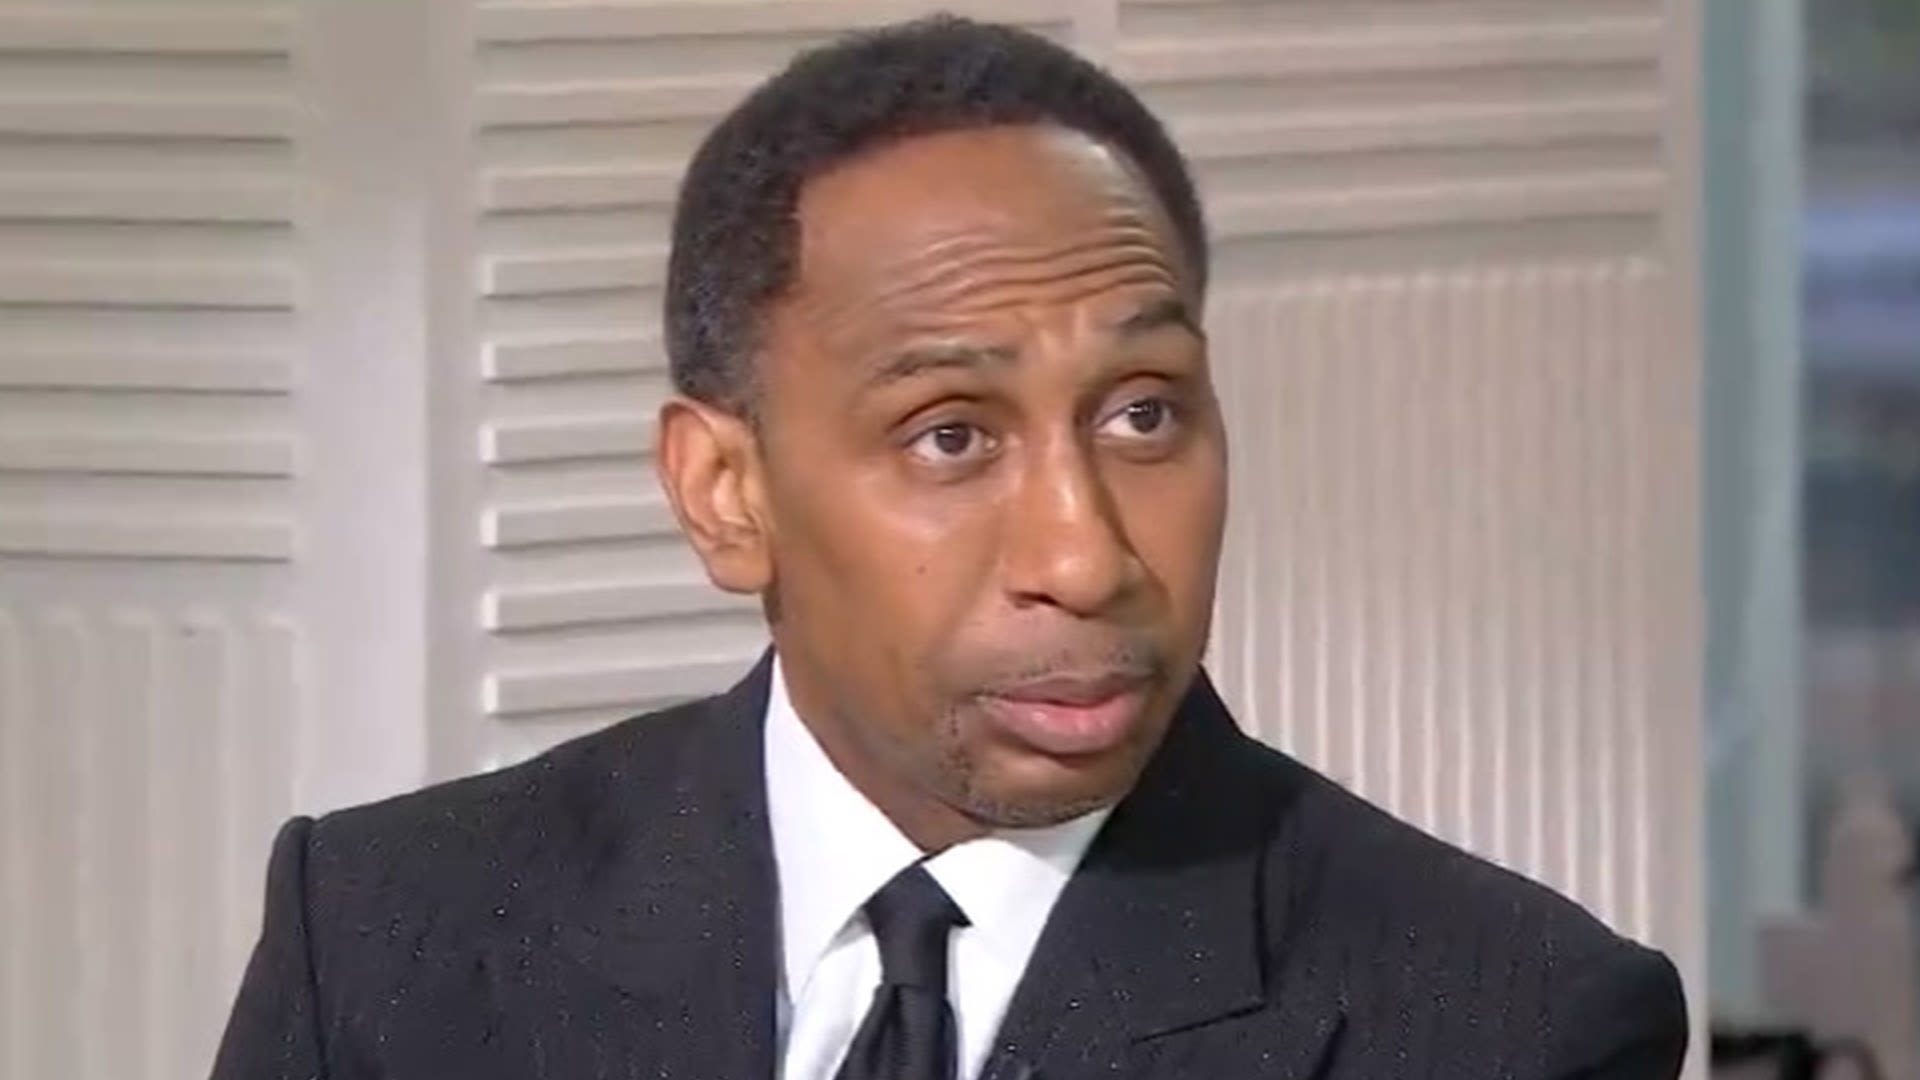 Stephen A. Smith admits he's 'embarrassed' after 'worst prediction' in career